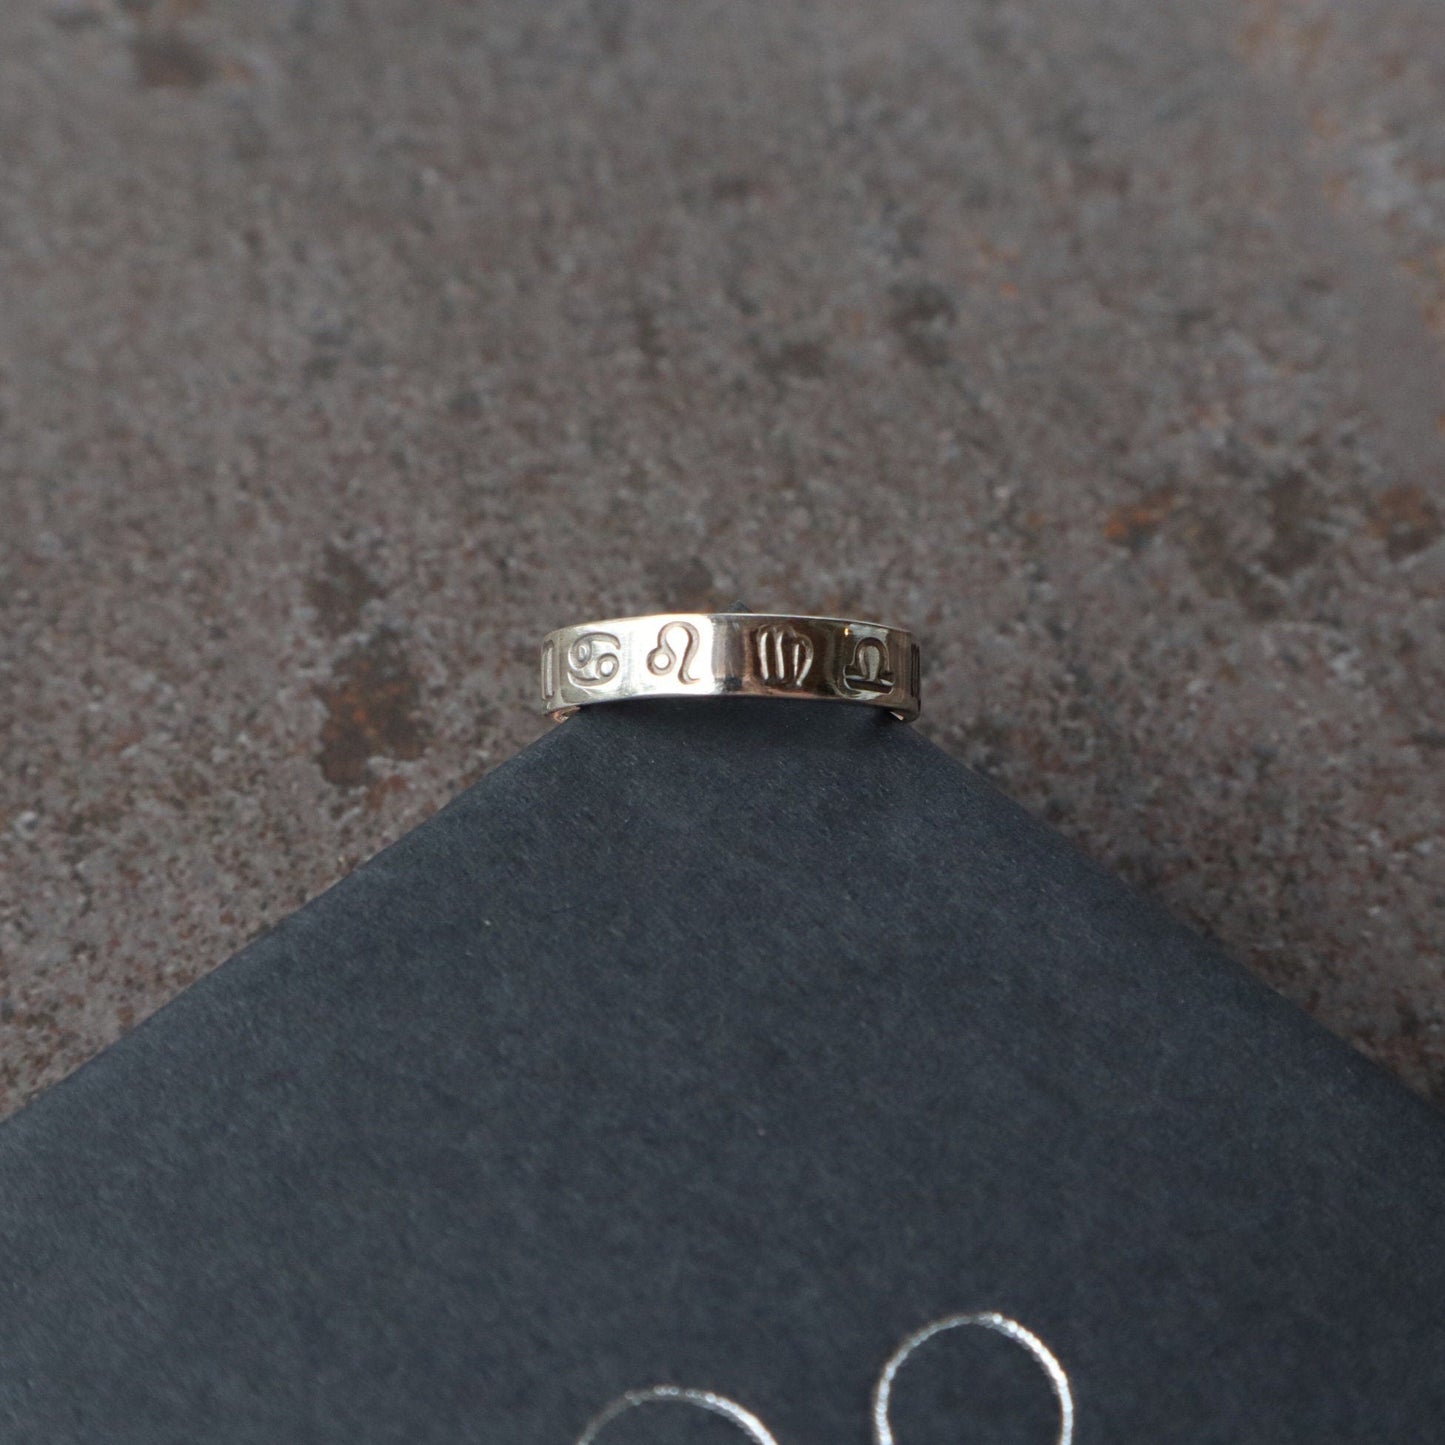 Cancer, Leo, Virgo, Libra Zodiac Signs on a Sterling Silver Ring